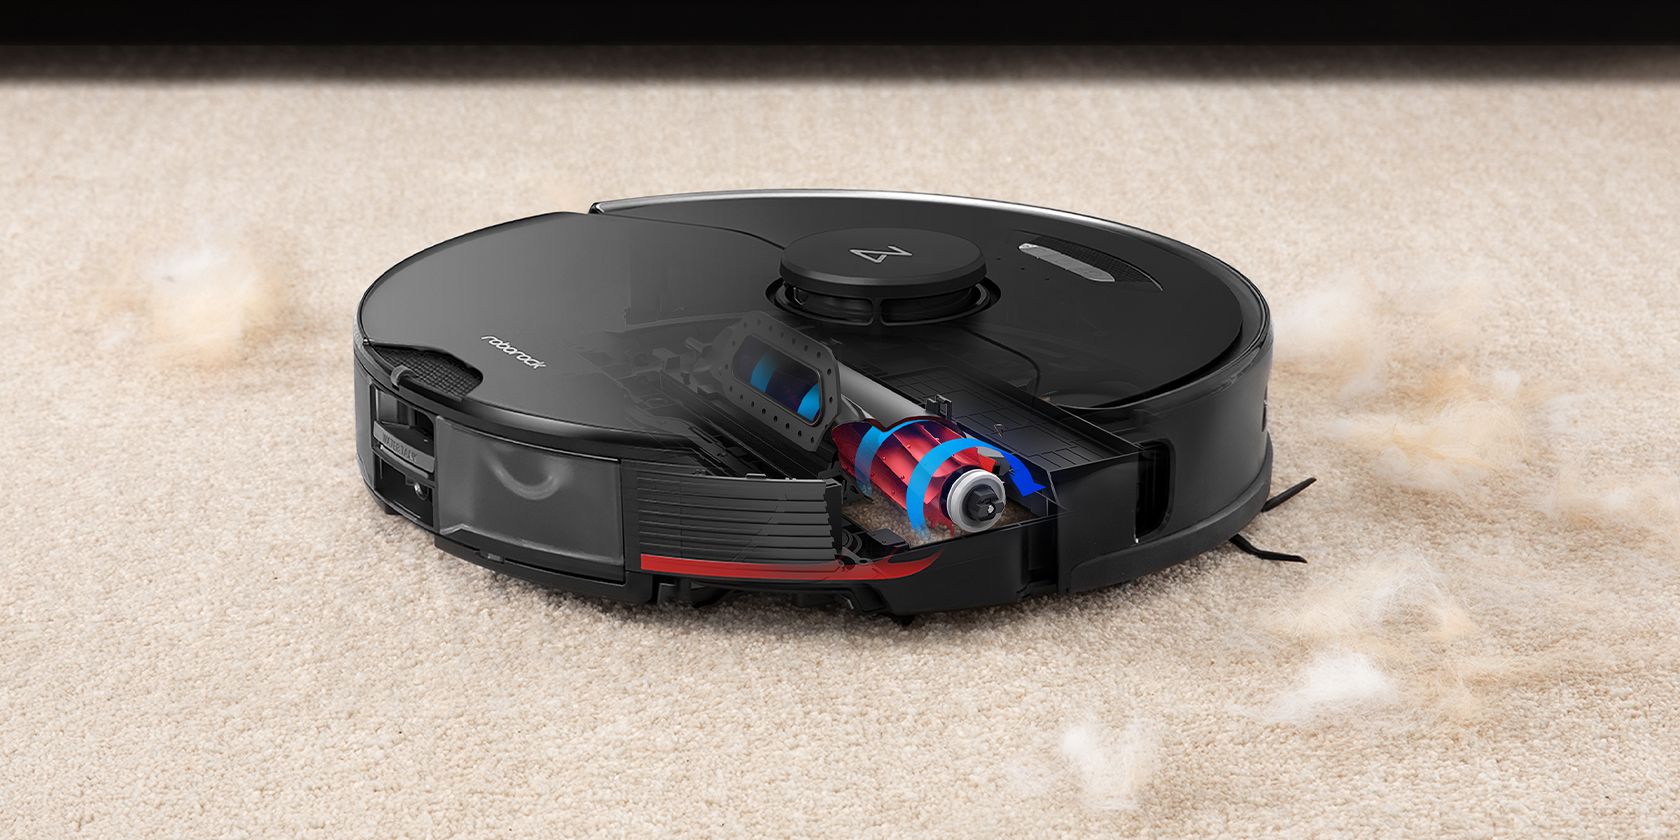 The Roborock S7 MaxV Ultra cleans, mops, avoids obstacles and self